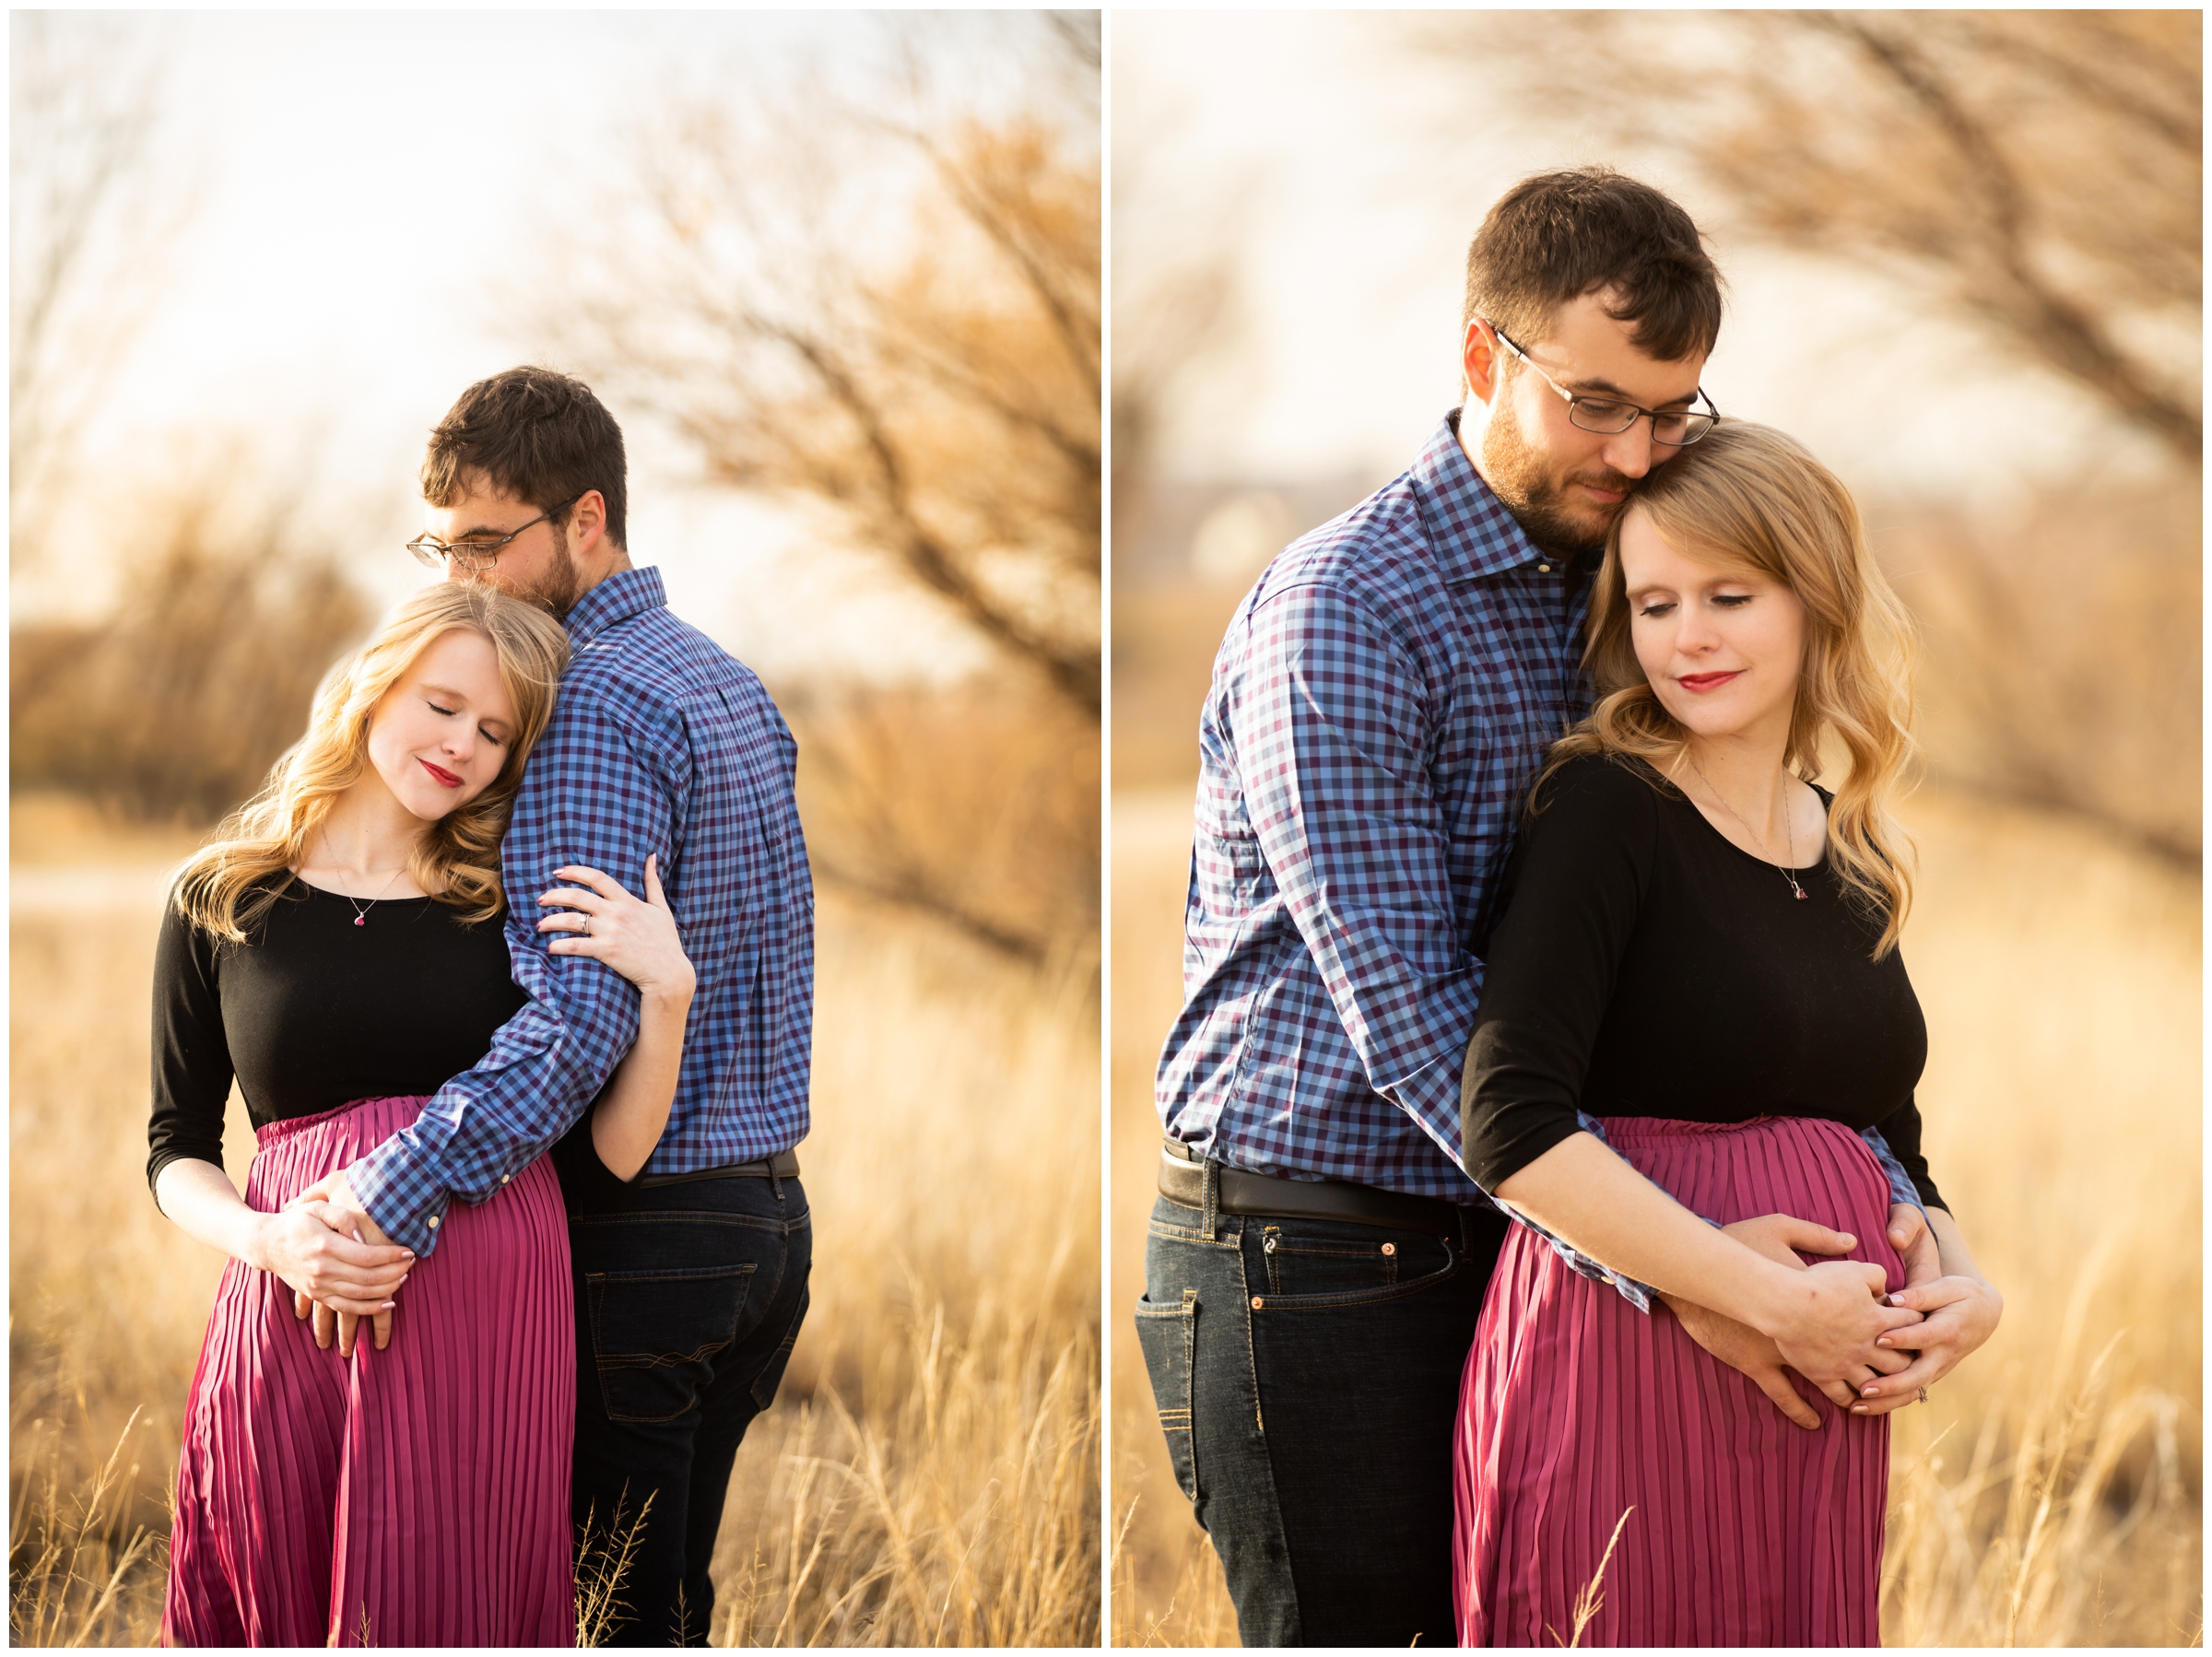 Colorado fall maternity pictures at 17 Mile House Farm Park by portrait photographer Plum Pretty Photography